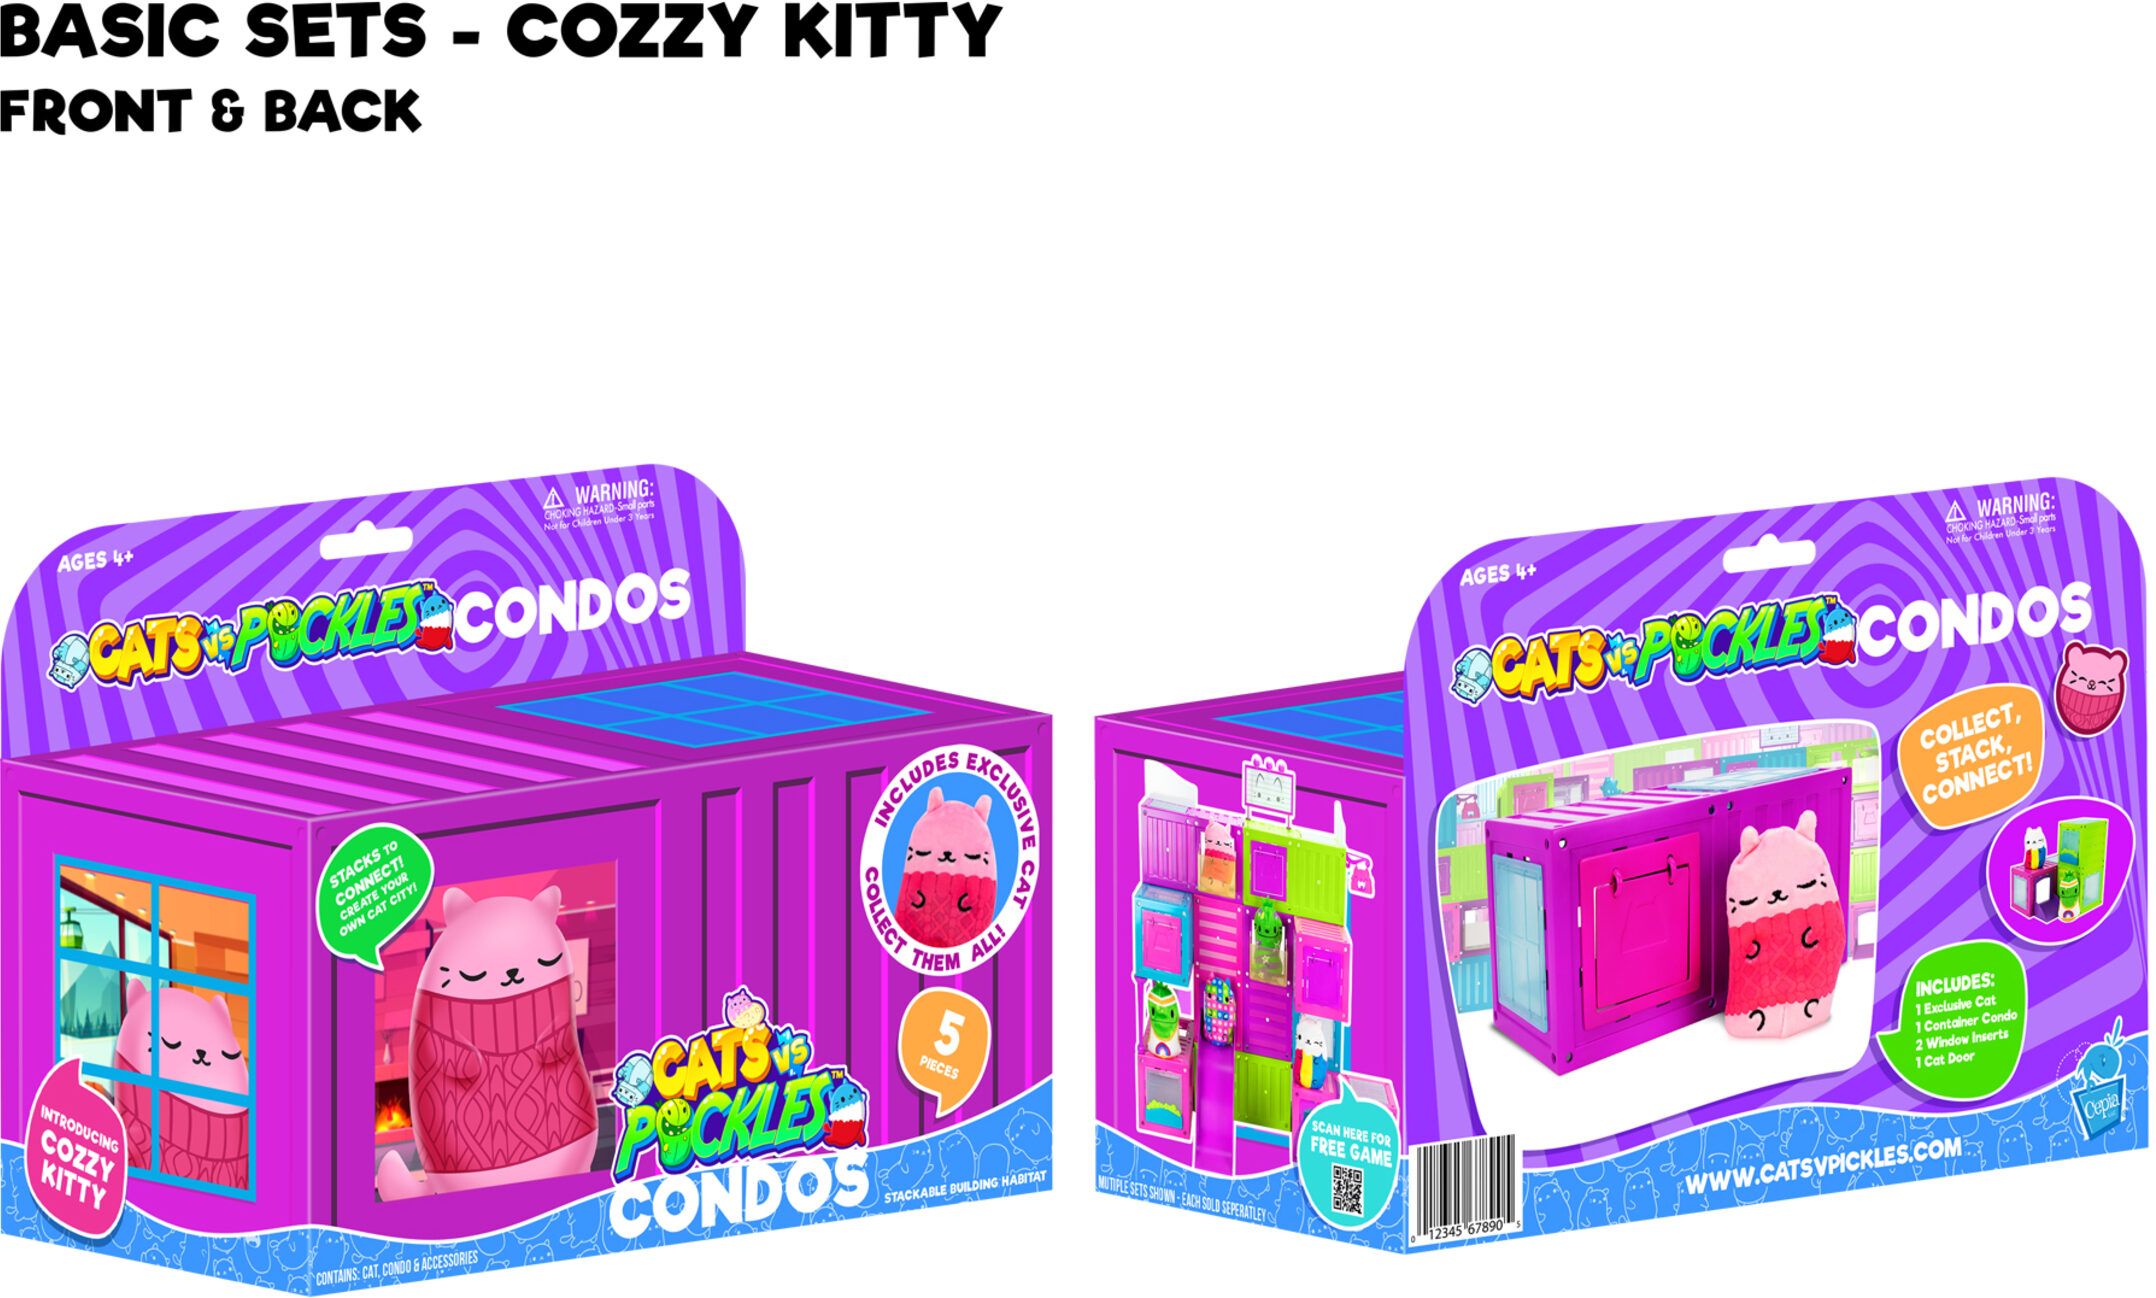 Cats-Vs-Pickles-Condo-With-Exclusive-Cozzy-Kitty